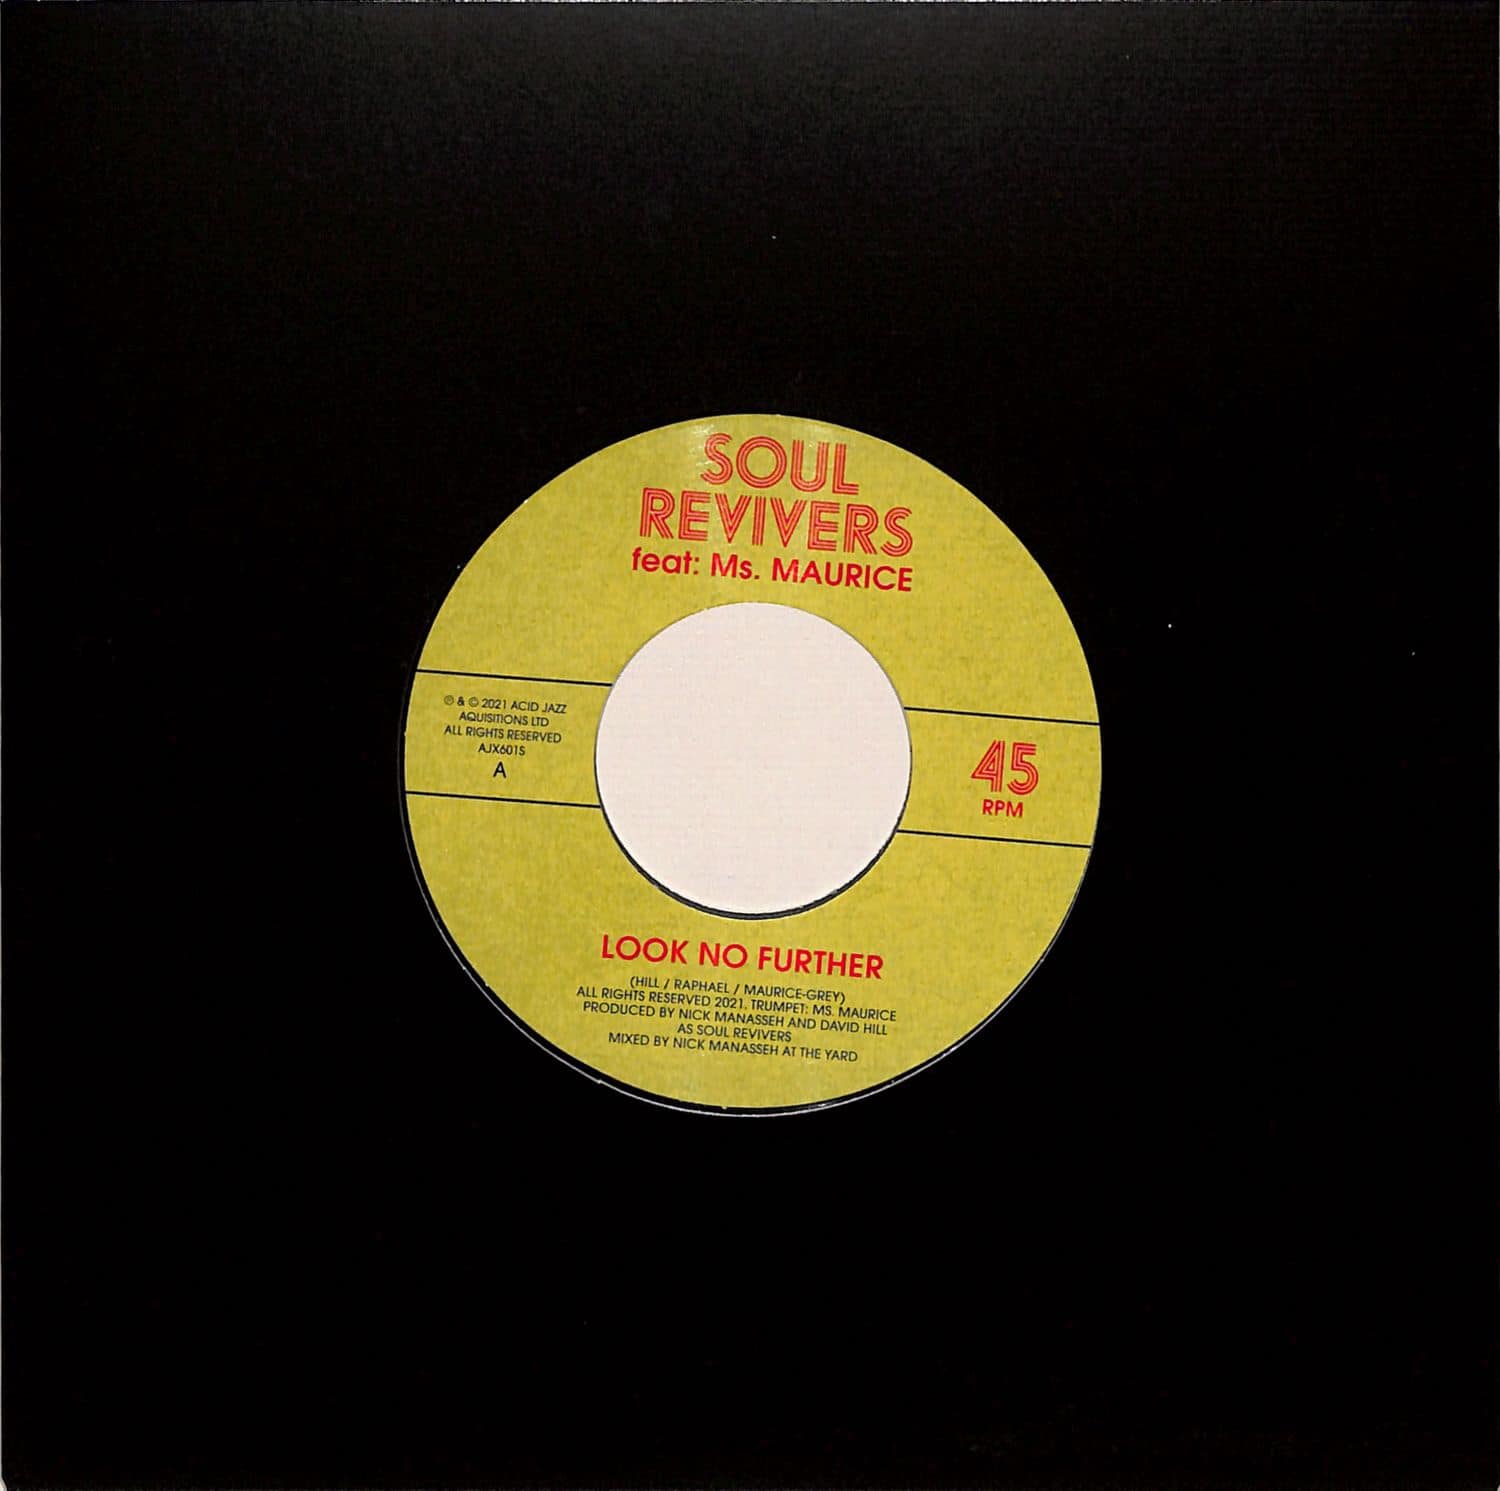 Soul Revivers ft. Ms. Maurice - LOOK NO FURTHER / FURTHER DUB 